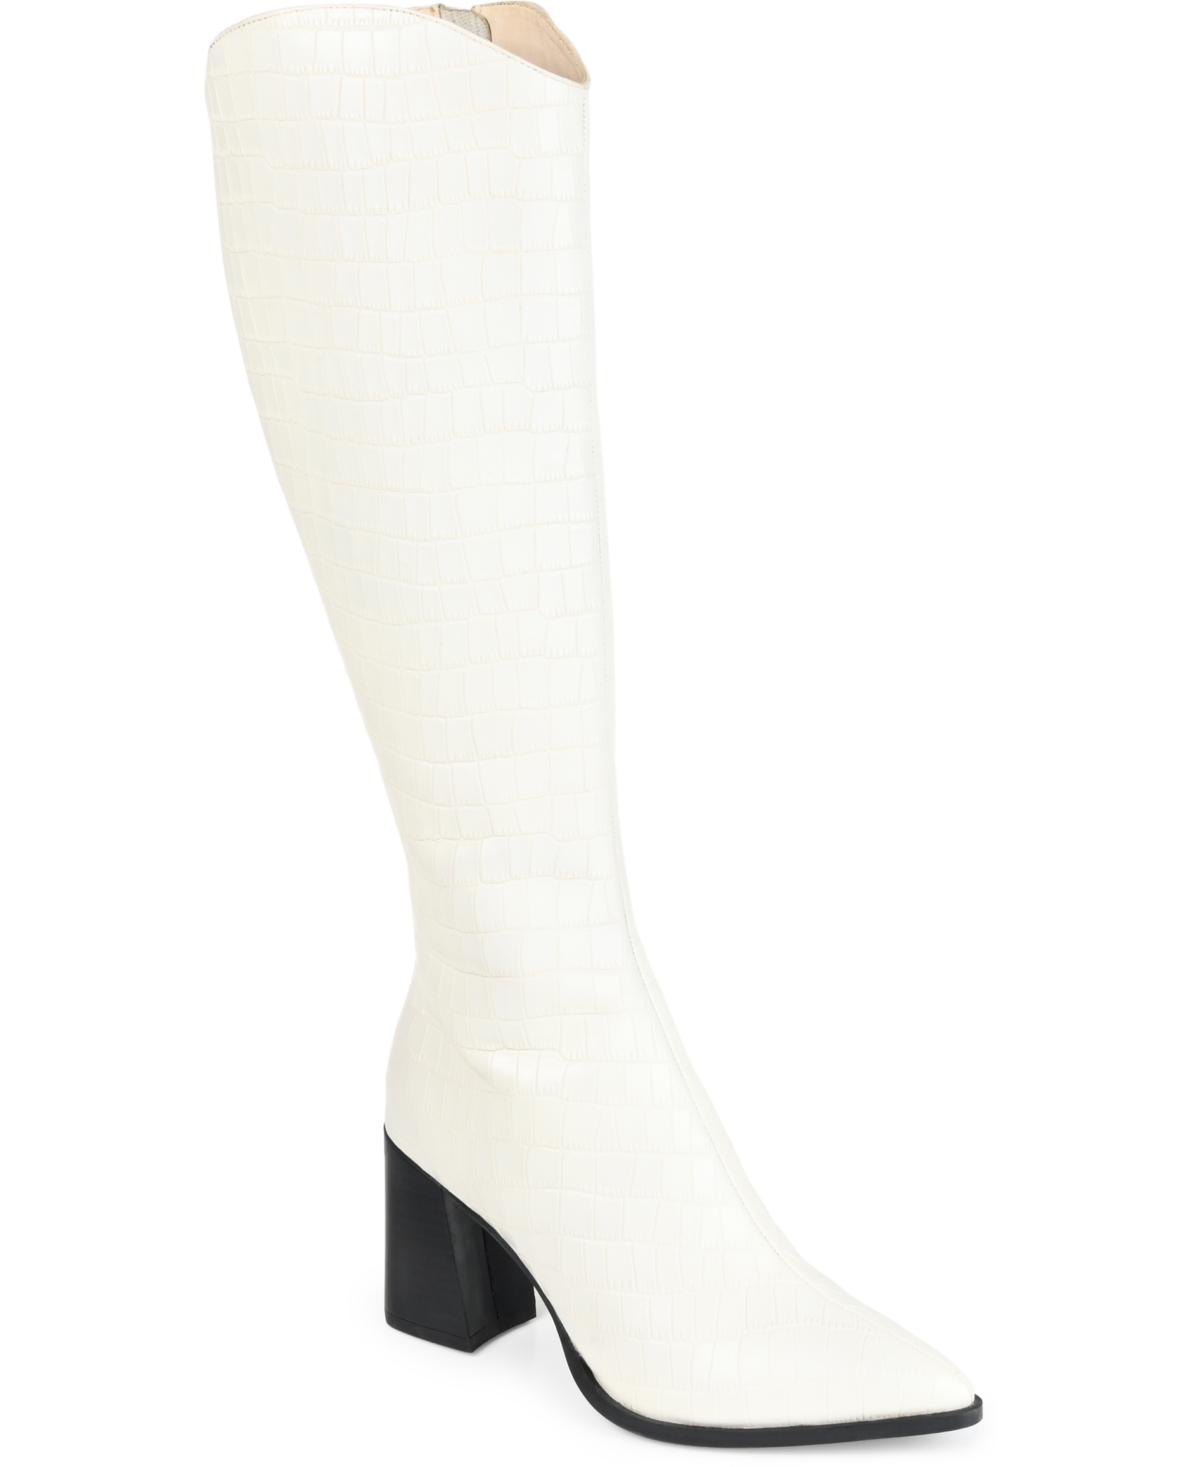 Women's Laila Knee High Boots - Off White